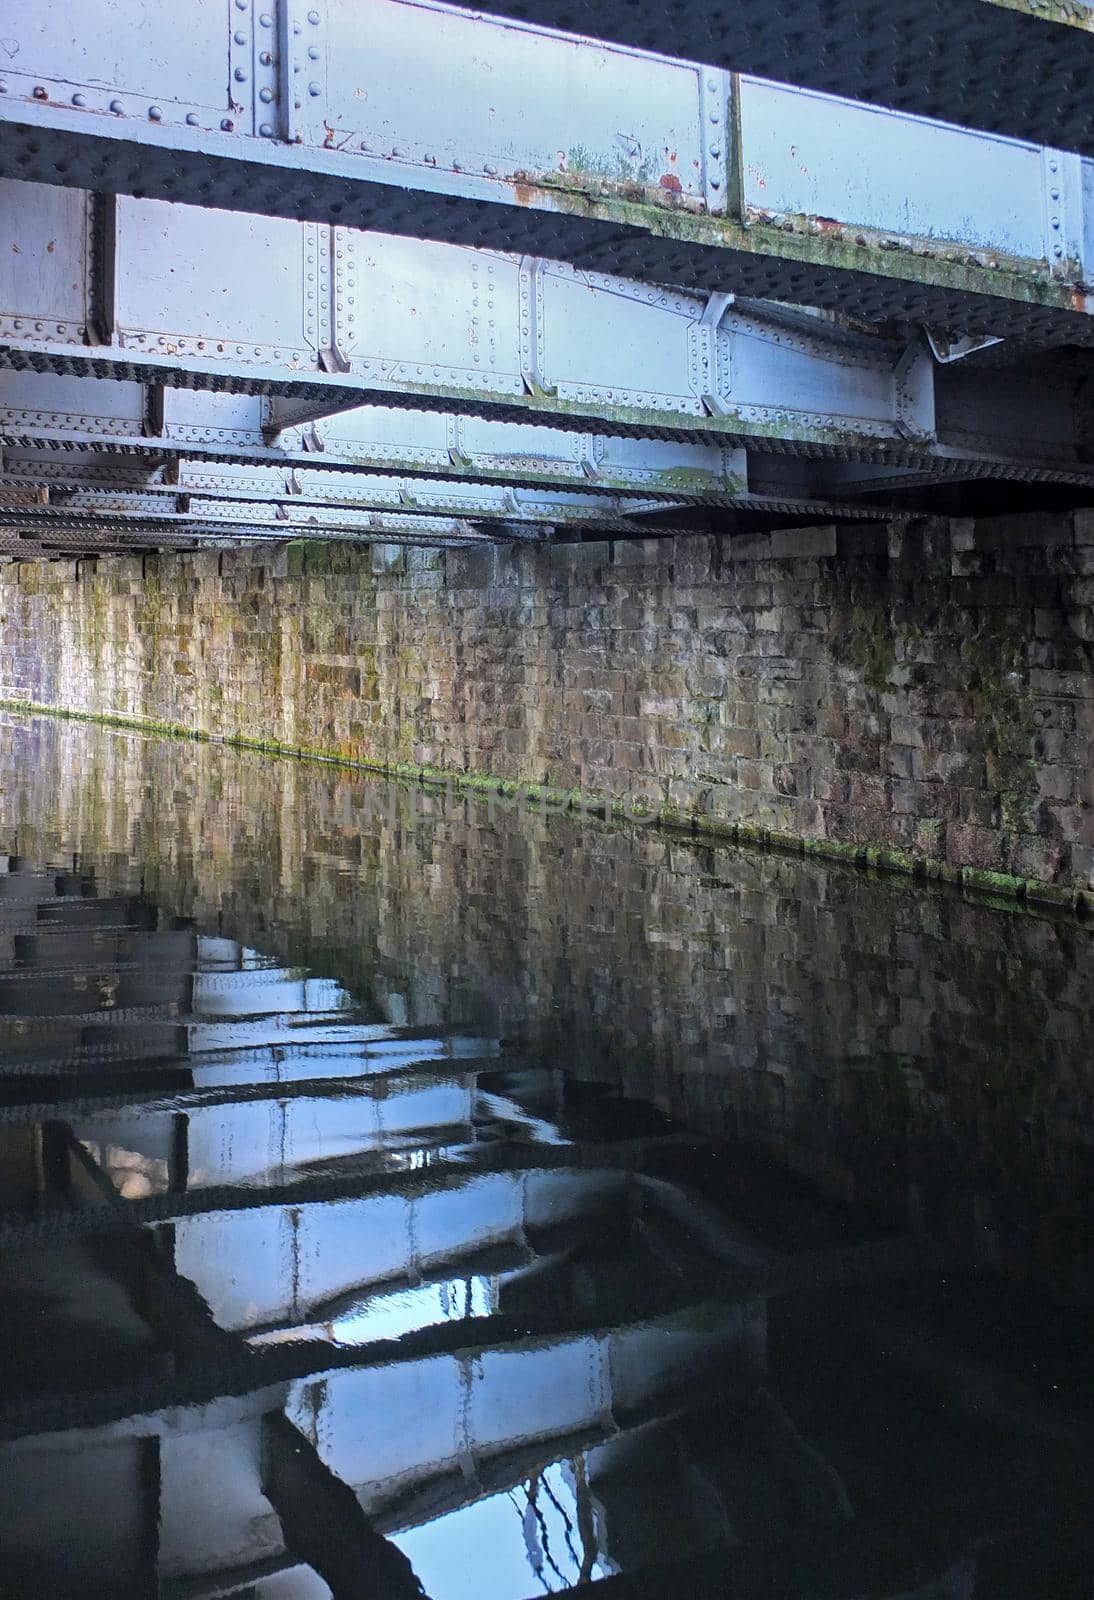 old steel girders reflected reflected in the water of a dark canal under a bridge